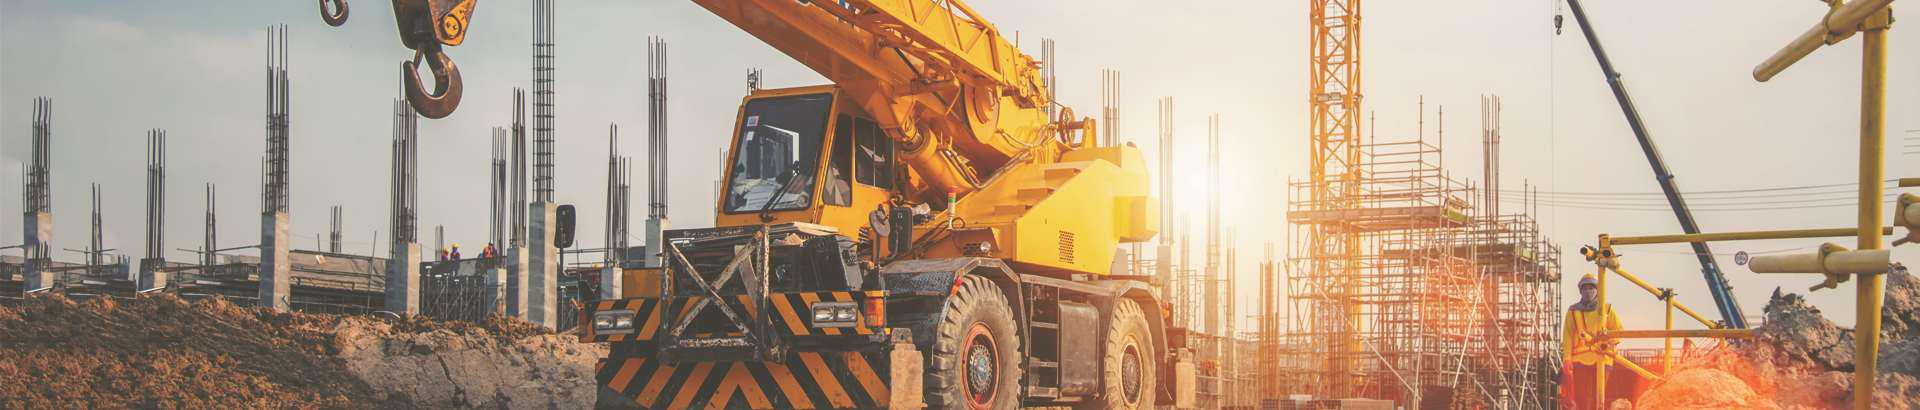 construction machinery and tools, lifting and handling machines, lifting services, Car crane services, Specific projects, Car cranes, Transport services, trucks, trailer rental, crane